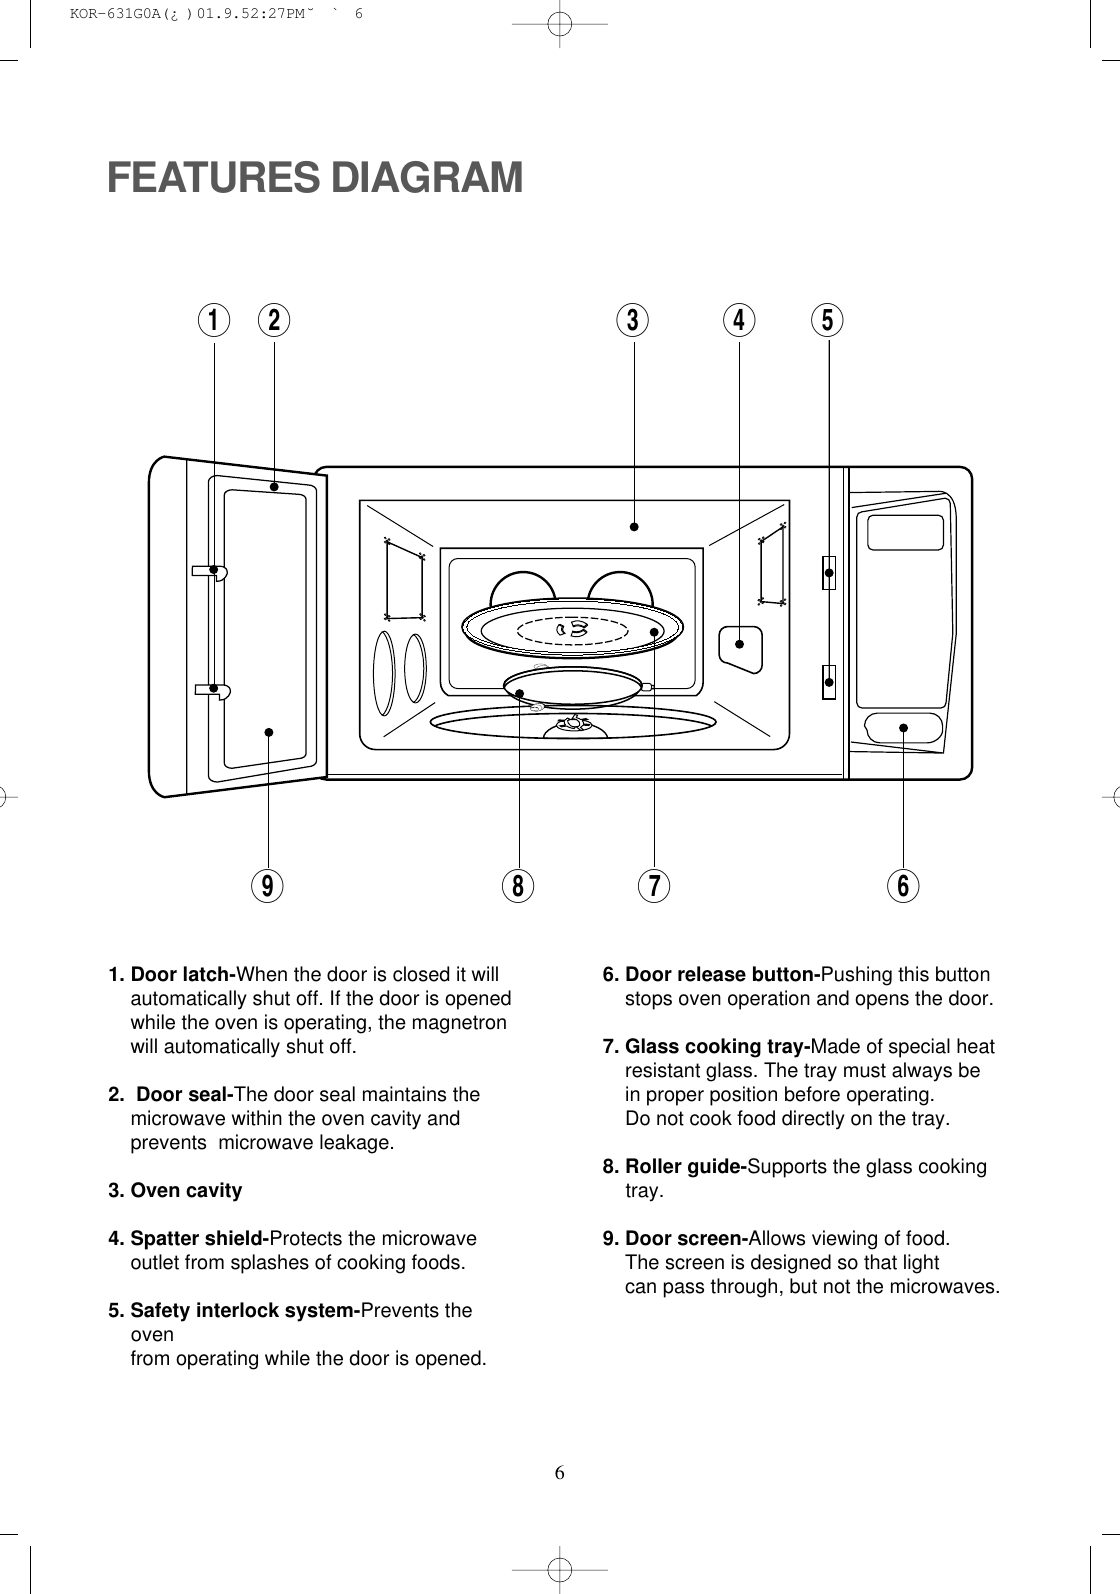 61. Door latch-When the door is closed it will automatically shut off. If the door is openedwhile the oven is operating, the magnetronwill automatically shut off.2.  Door seal-The door seal maintains the microwave within the oven cavity and prevents  microwave leakage.3. Oven cavity4. Spatter shield-Protects the microwave outlet from splashes of cooking foods.5. Safety interlock system-Prevents theovenfrom operating while the door is opened.6. Door release button-Pushing this buttonstops oven operation and opens the door.7. Glass cooking tray-Made of special heat resistant glass. The tray must always bein proper position before operating. Do not cook food directly on the tray.8. Roller guide-Supports the glass cookingtray.9. Door screen-Allows viewing of food. The screen is designed so that light can pass through, but not the microwaves. FEATURES DIAGRAM543219876 KOR-631G0A(¿ )  01.9.5 2:27 PM  ˘`6